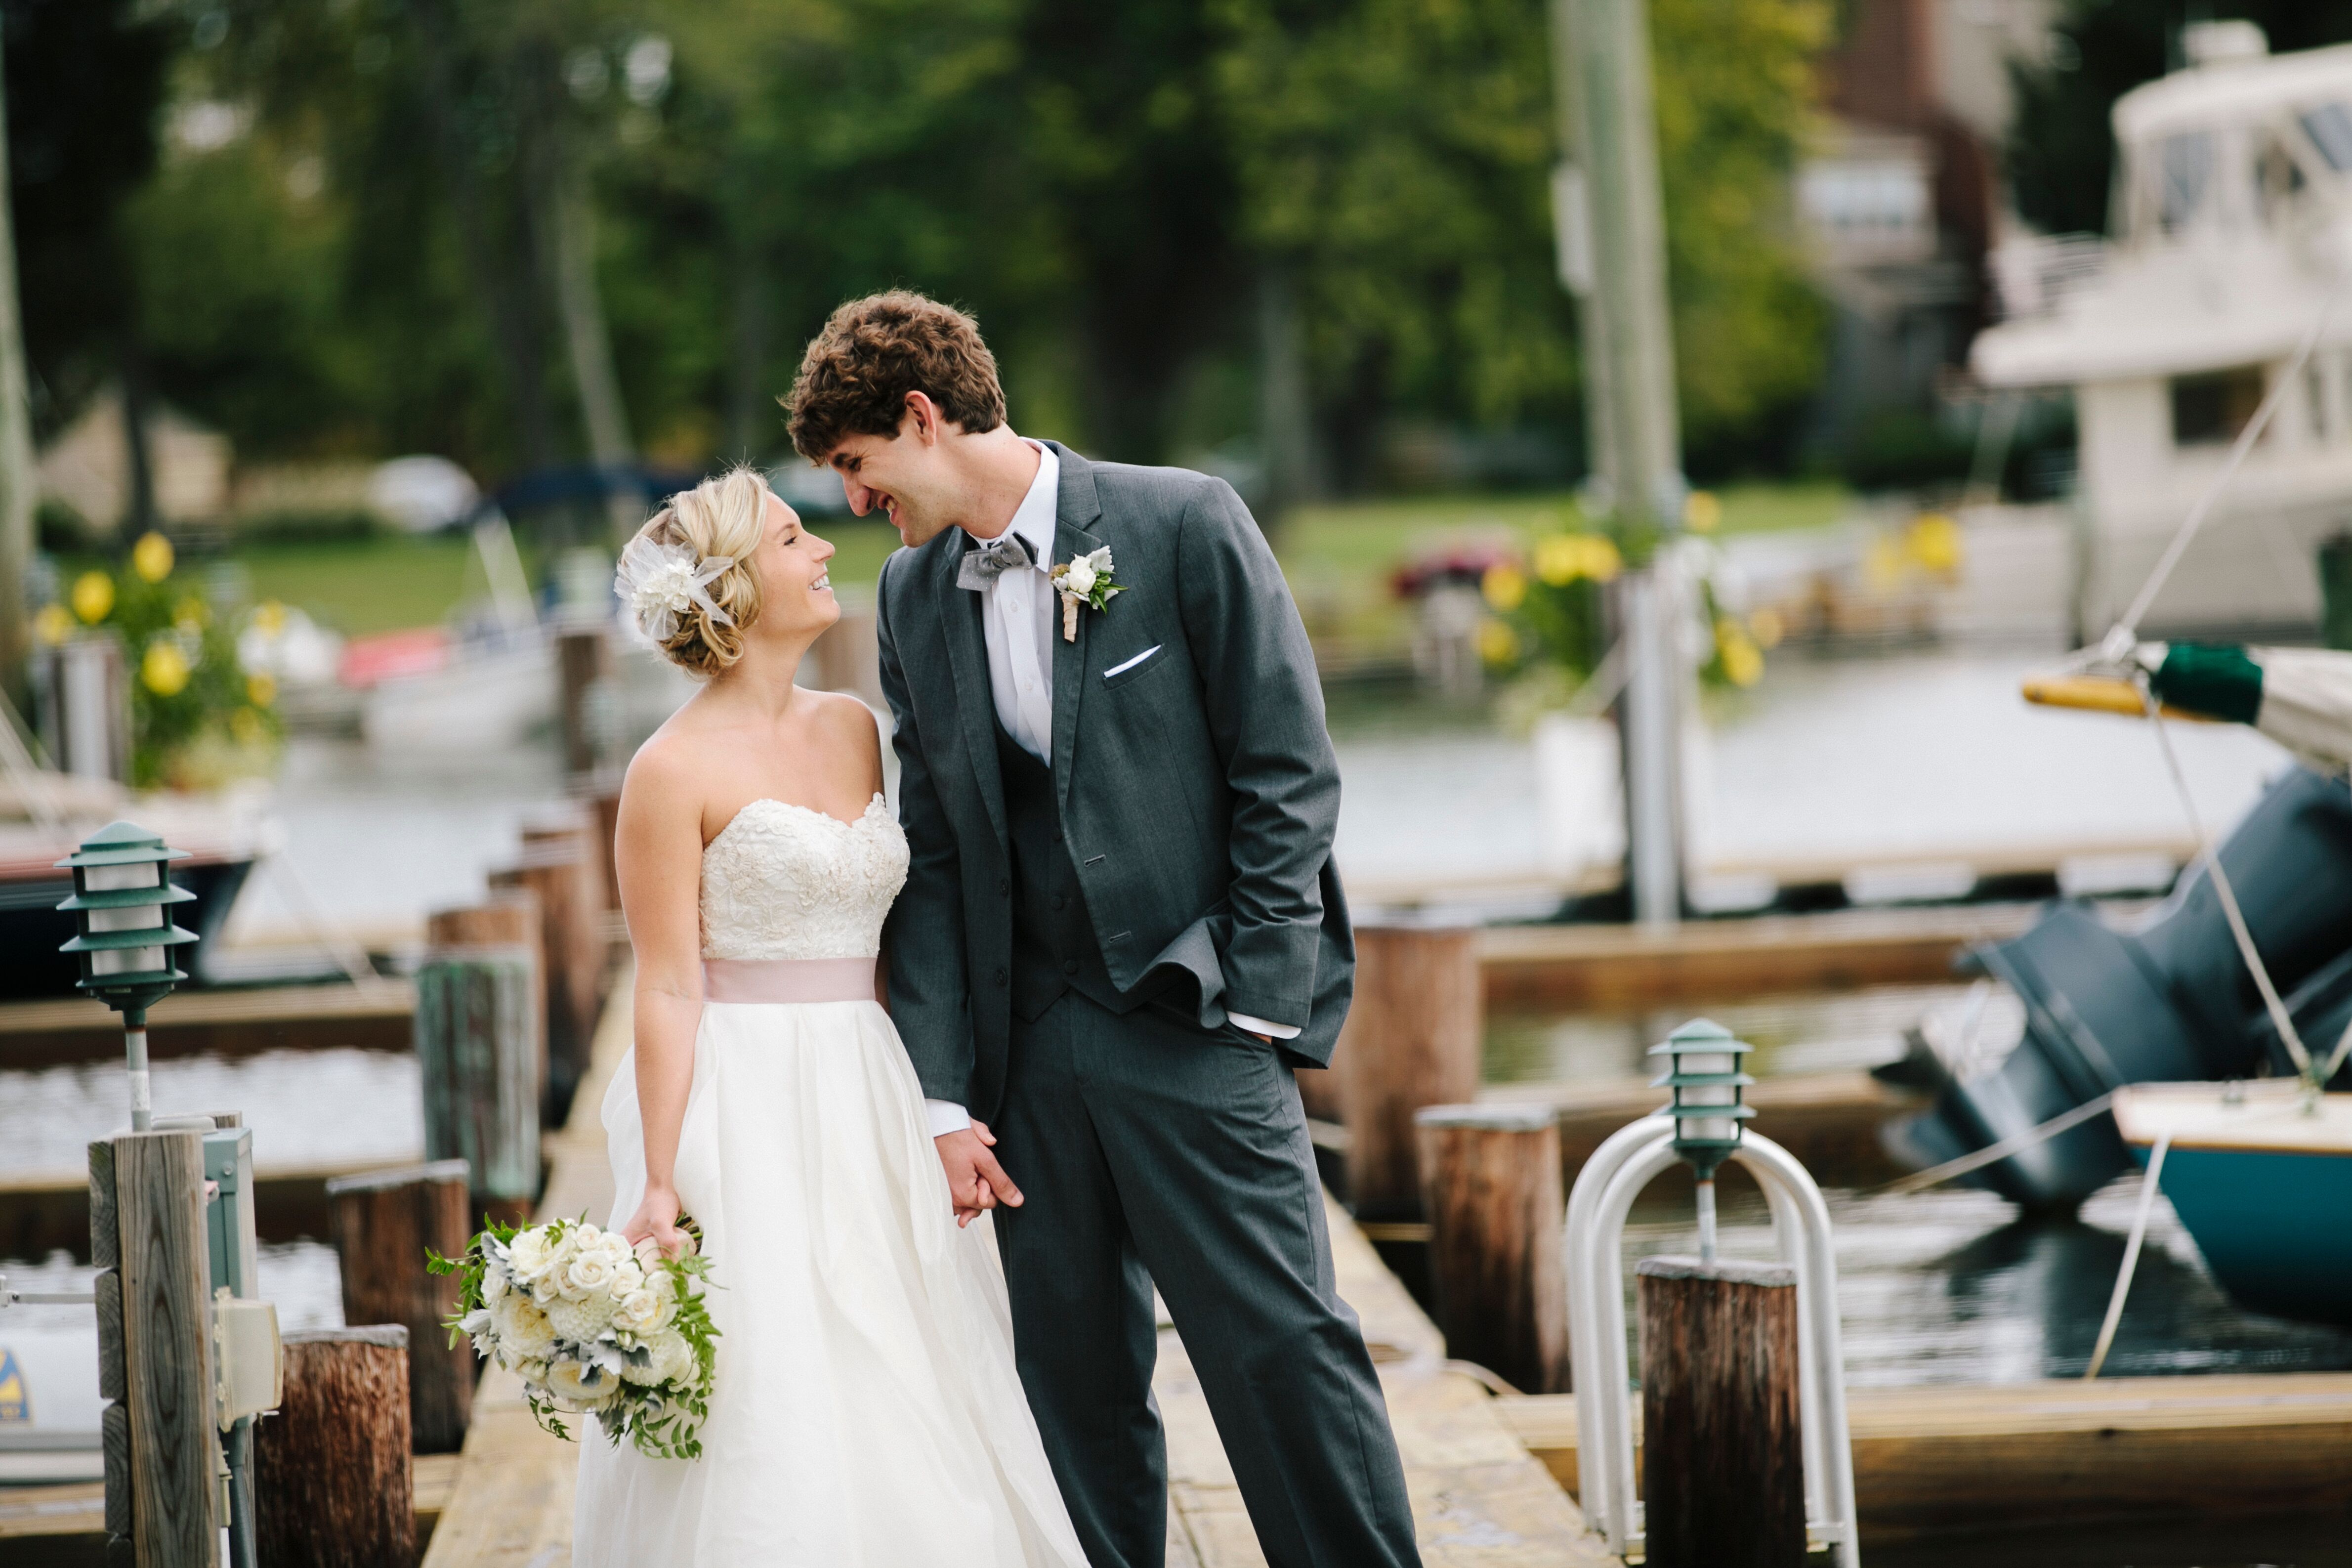 A Breathtaking, Waterfront Wedding at Inn at Perry Cabin ...